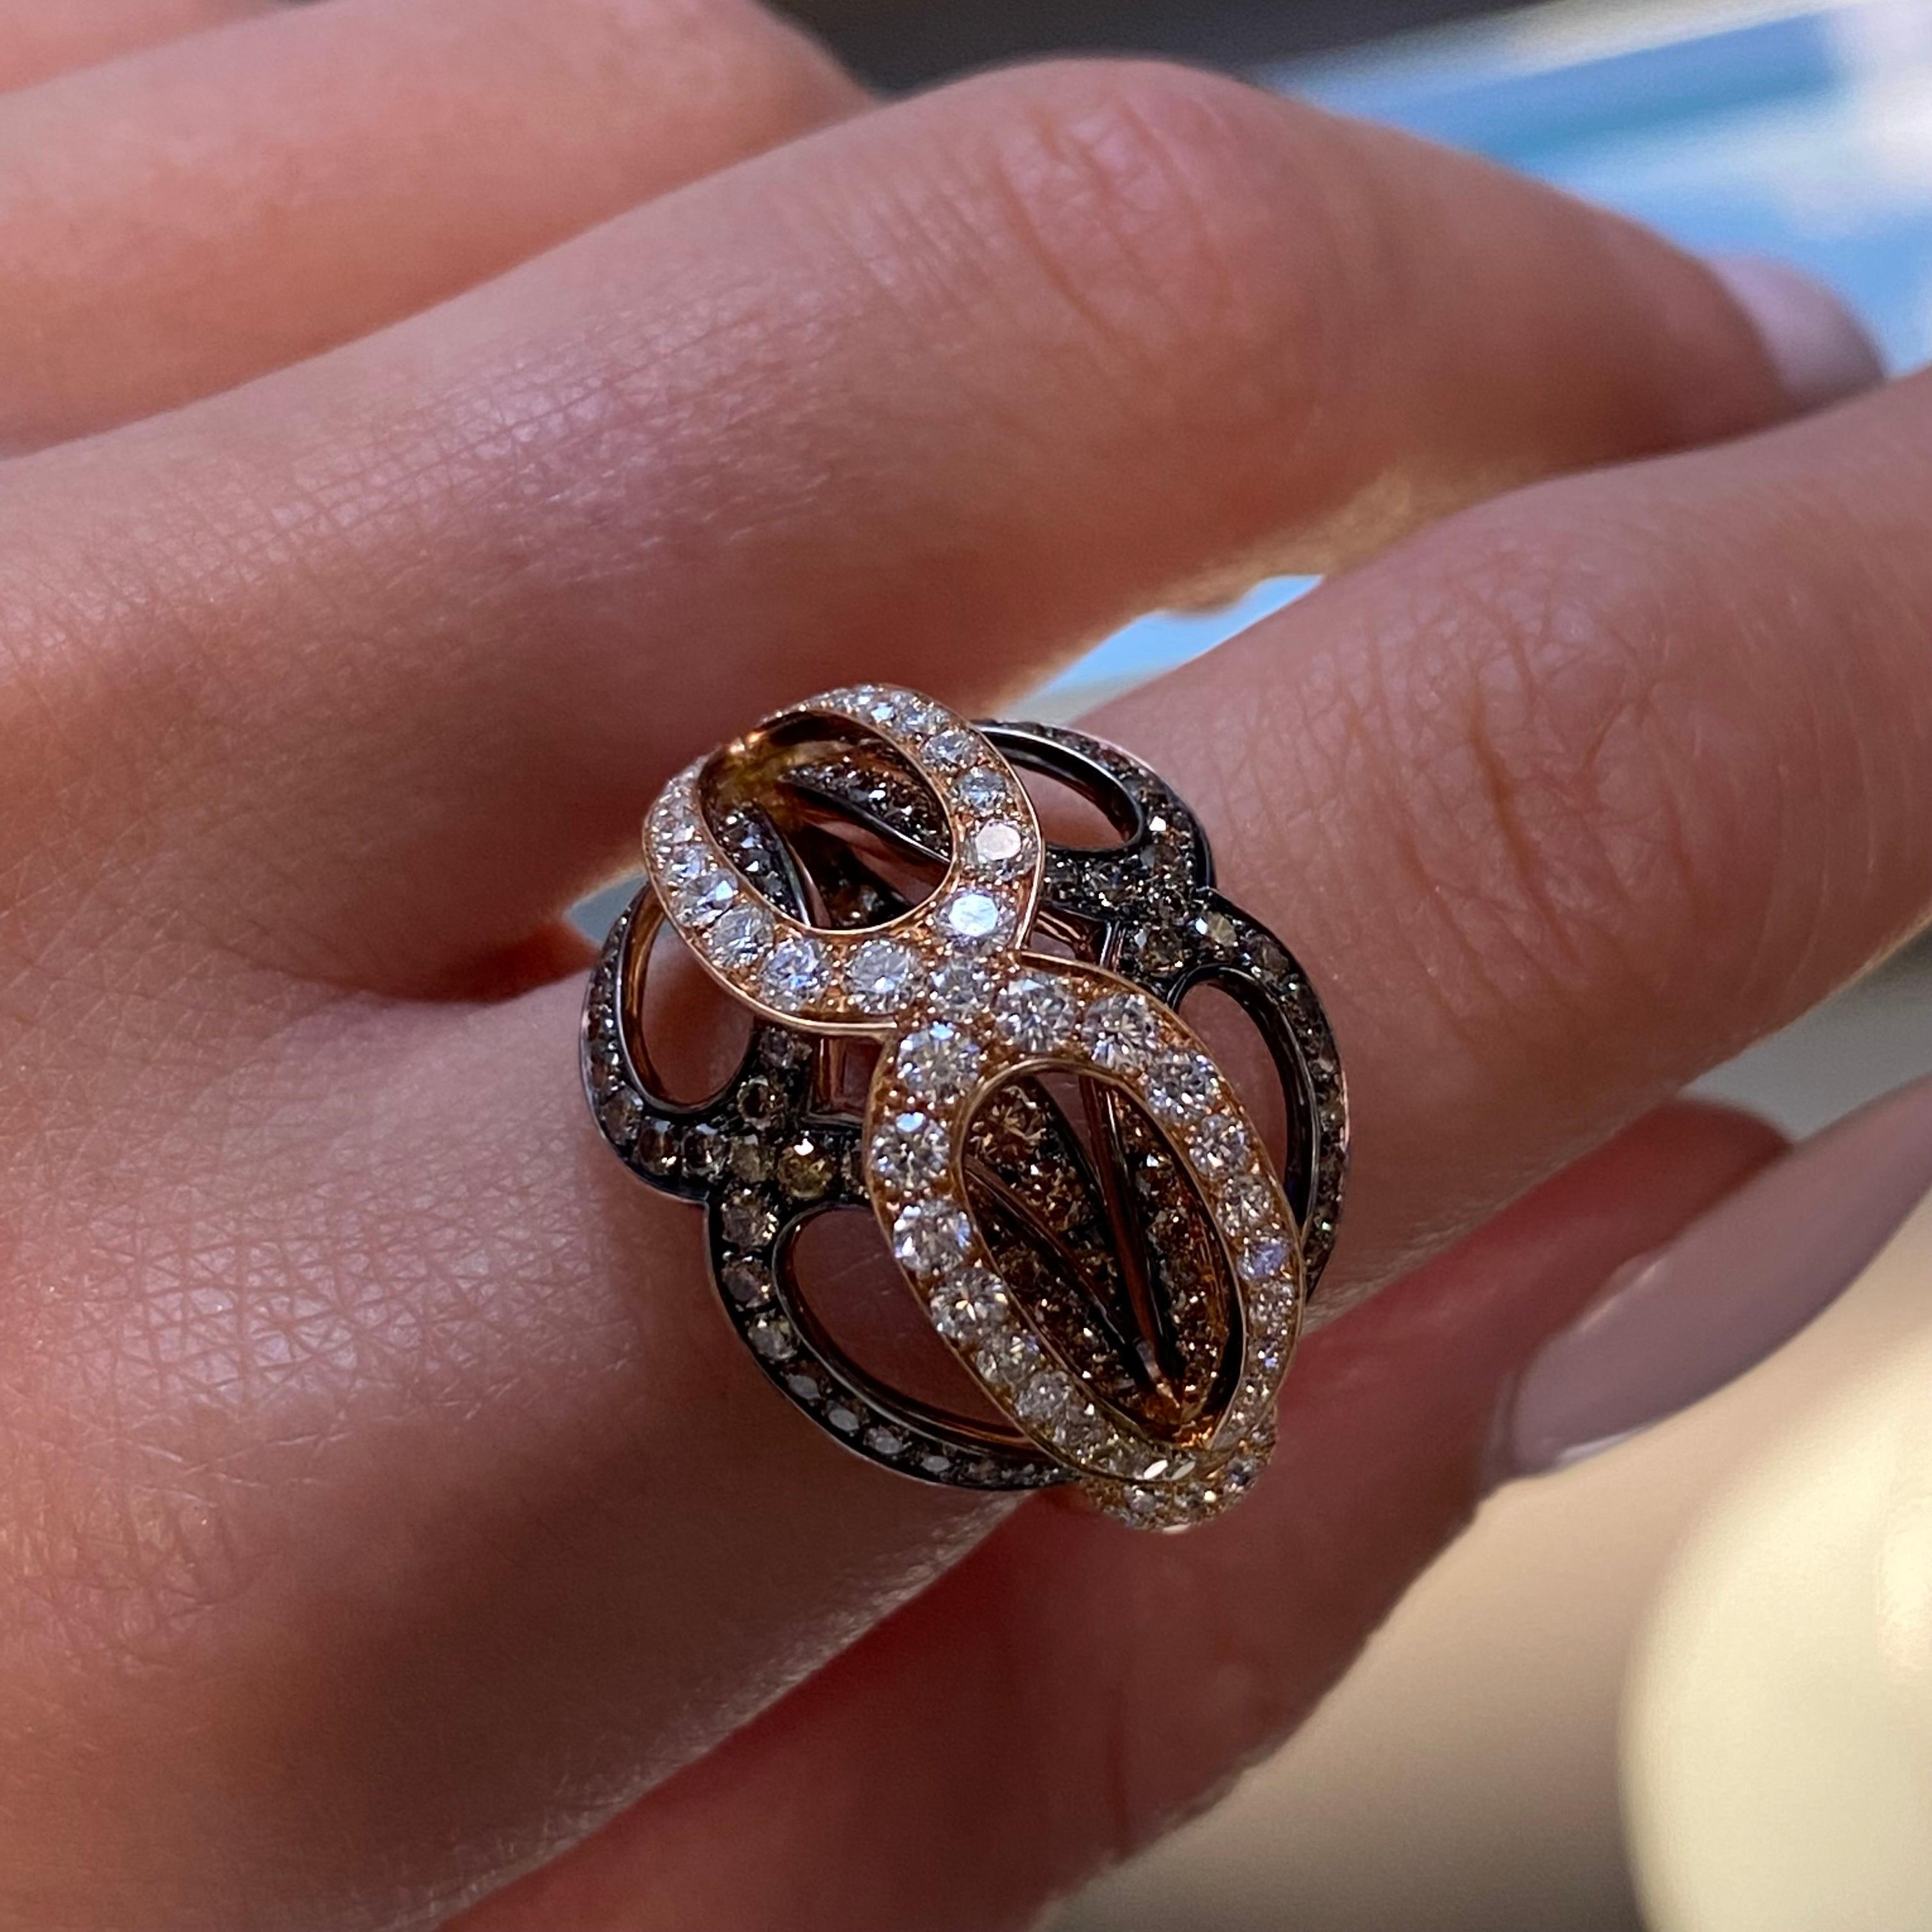 Luca Carati White & Brown Diamond Ring 18K Yellow Gold 2.89Cttw In New Condition For Sale In New York, NY